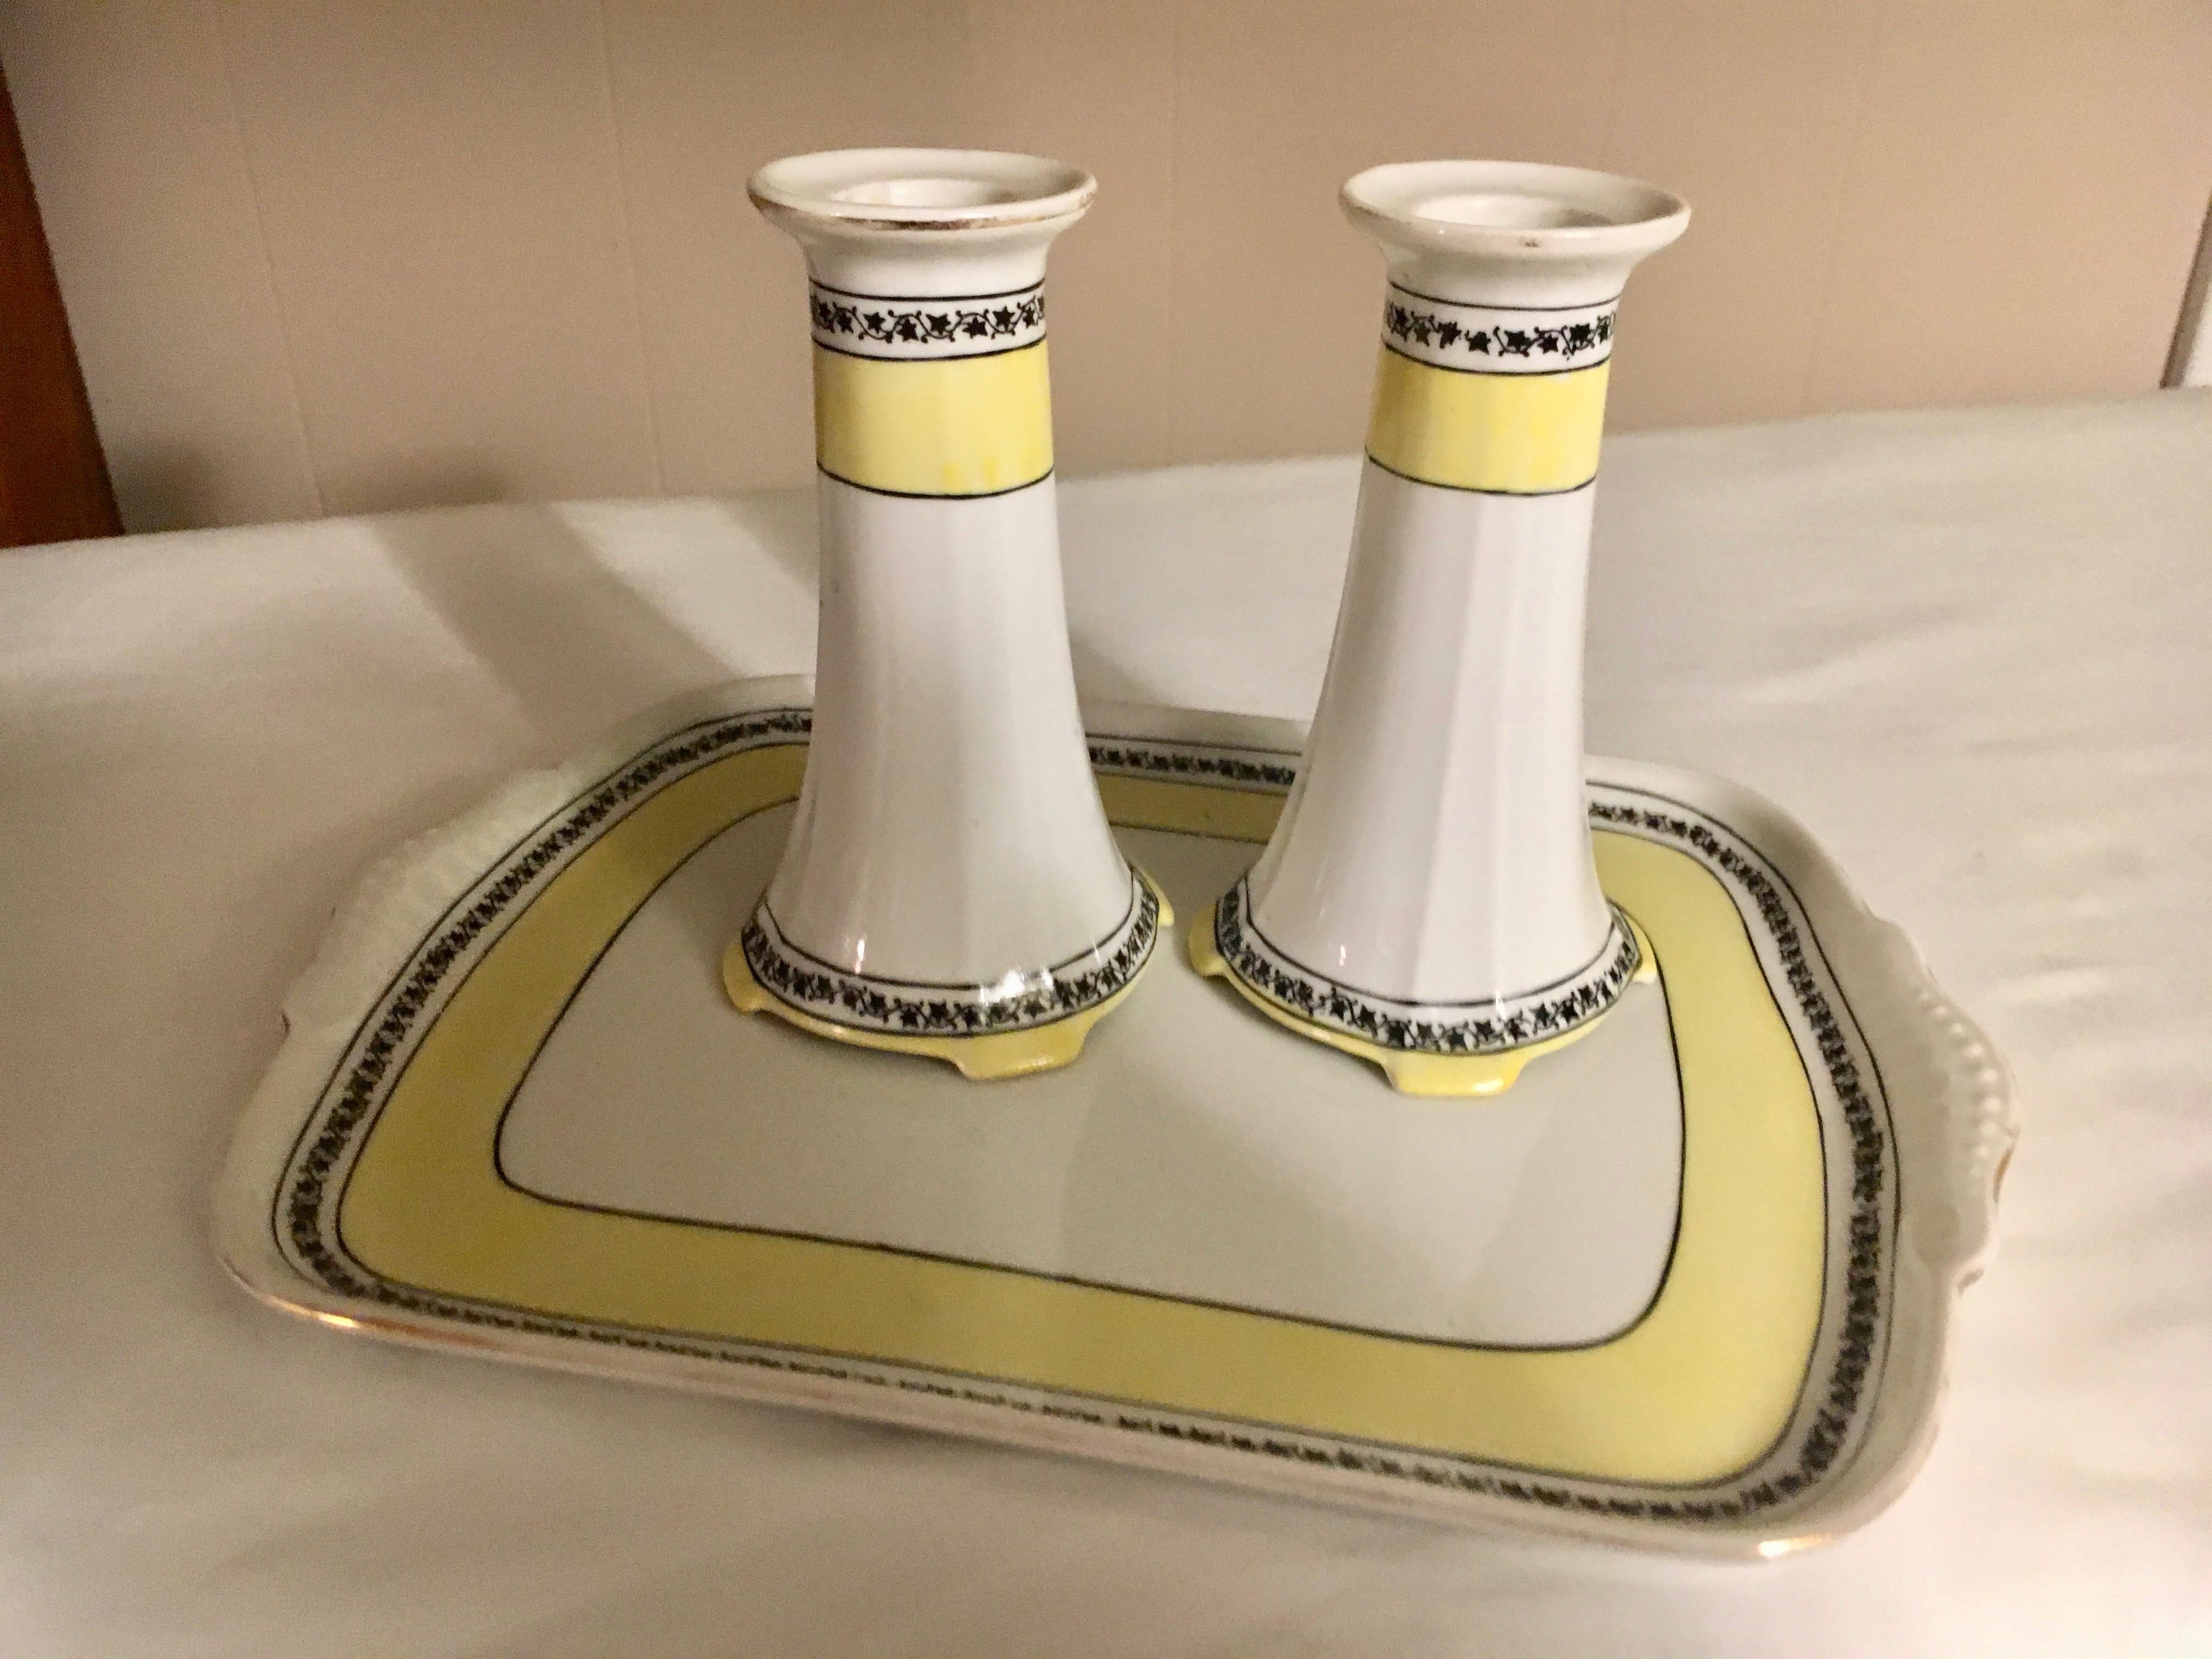 Union Bavaria Porcelain Tray and Candlesticks For Sale 3